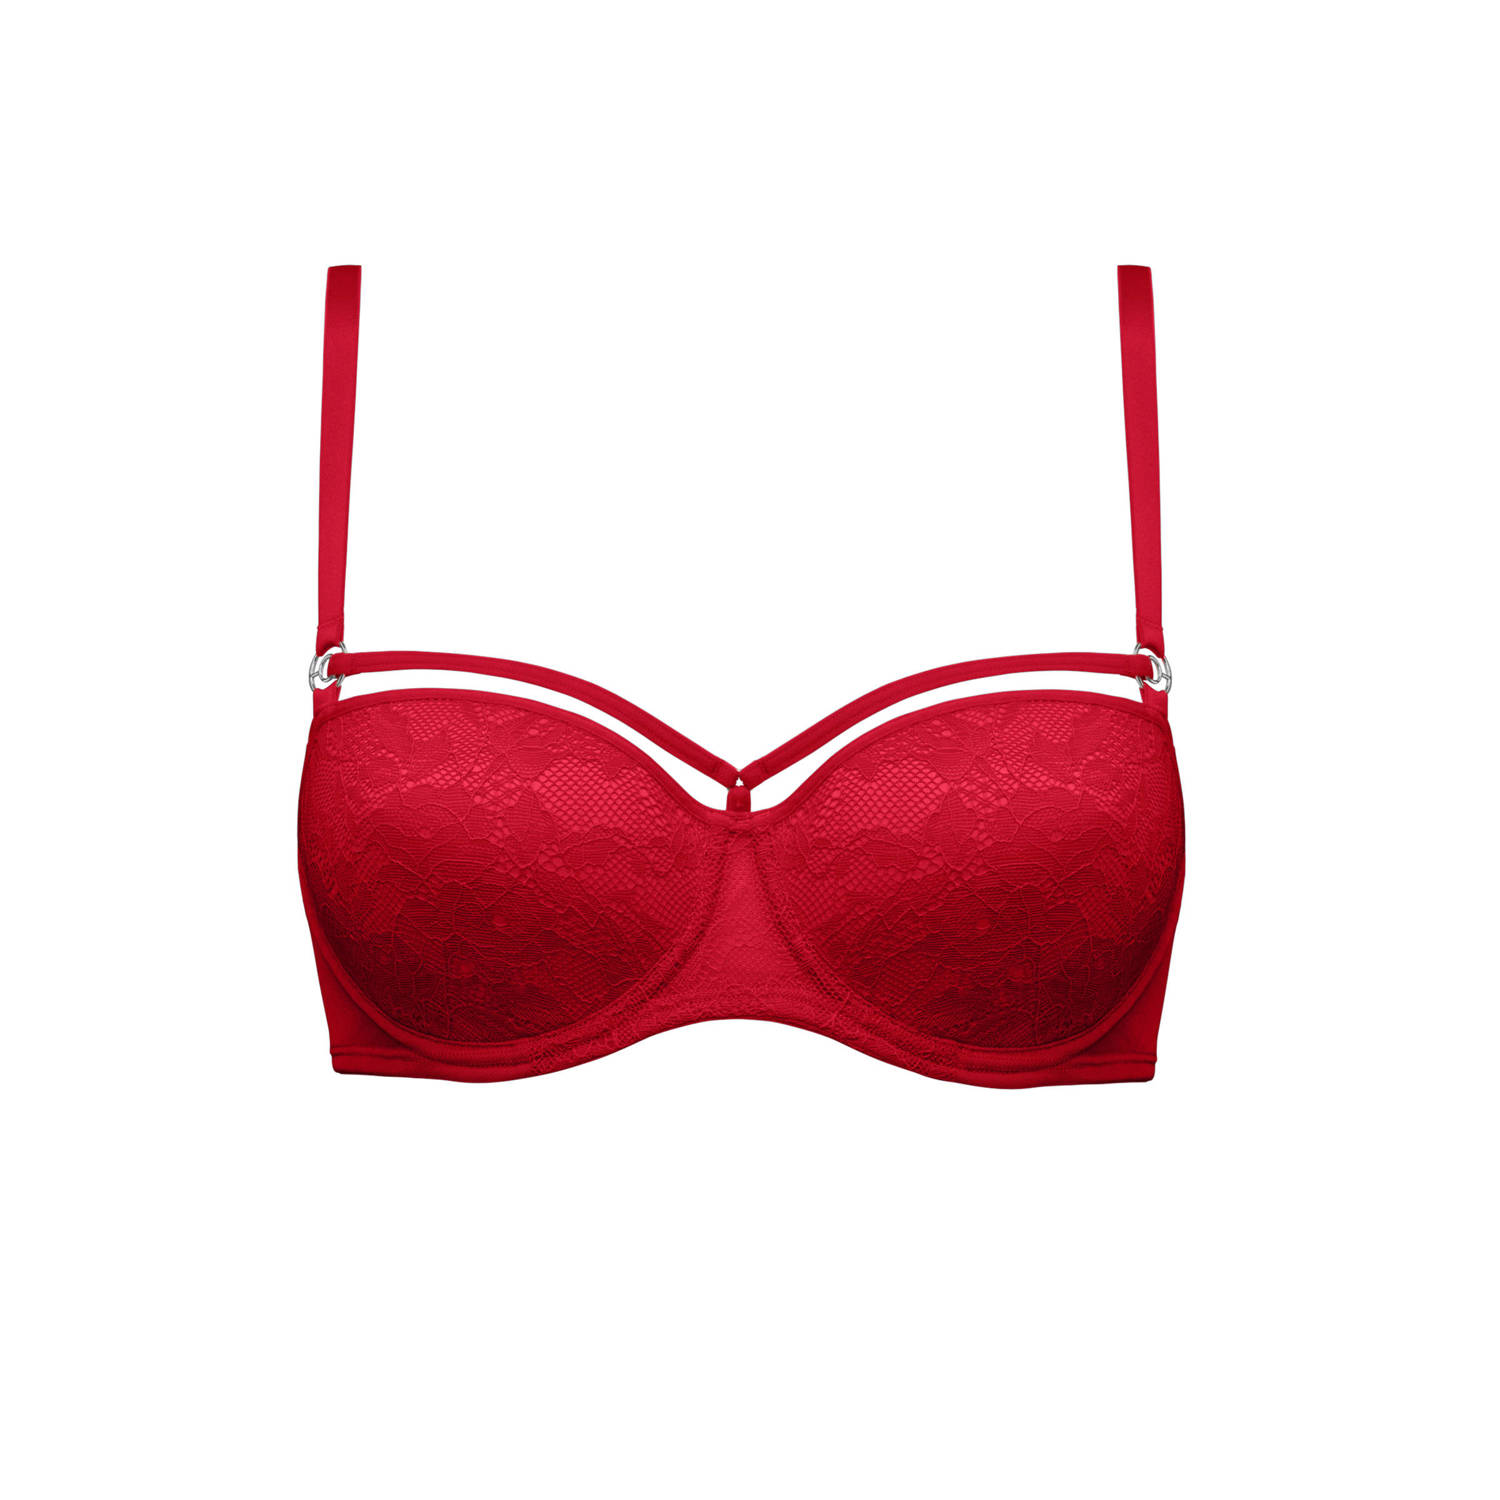 Marlies Dekkers space odyssey balconette bh wired padded red lace